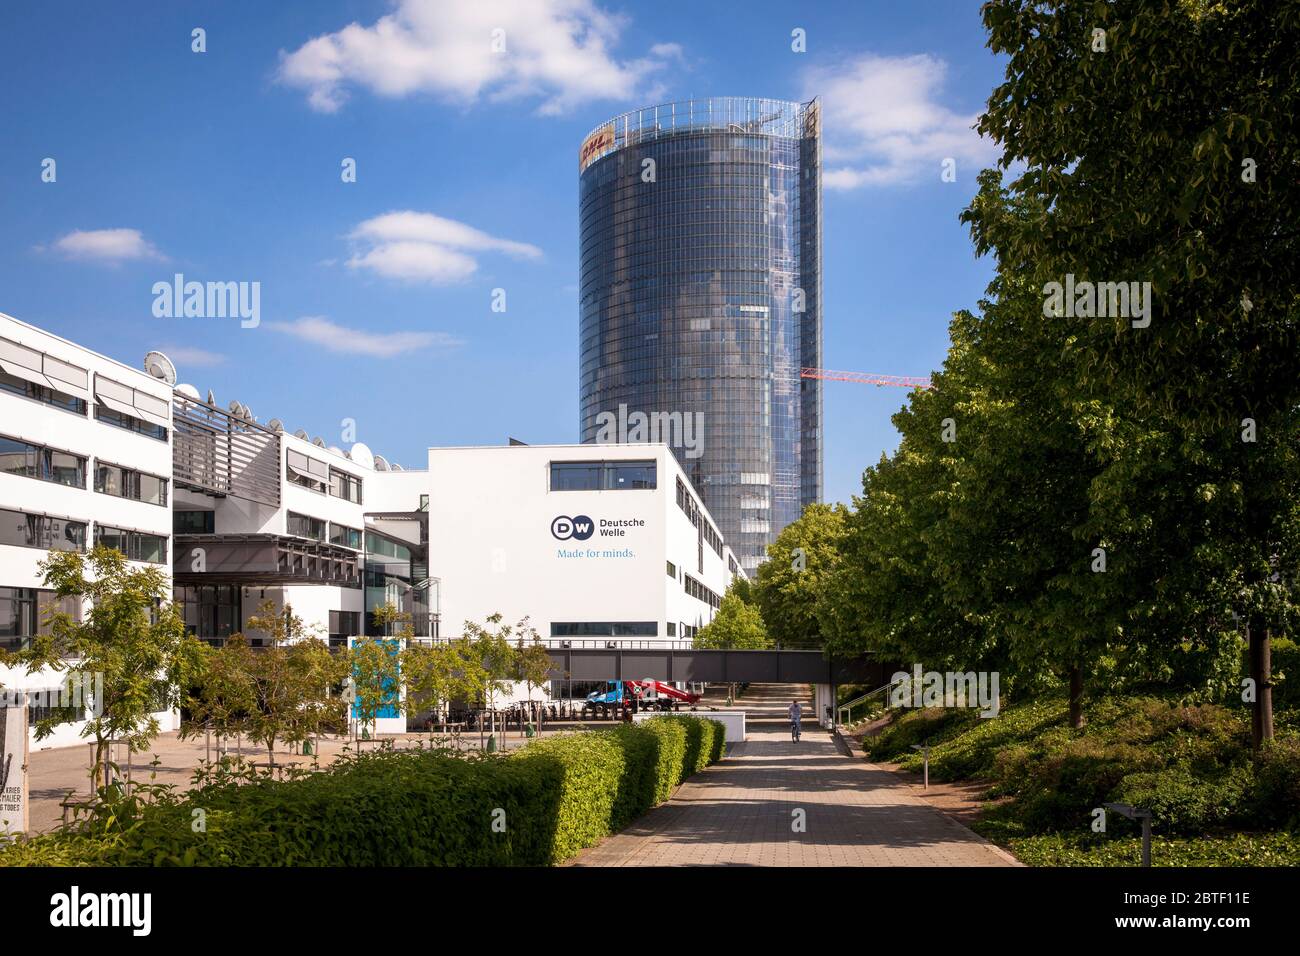 headquarters of the Deutsche Welle and the Post Tower, headquarters of the logistics company Deutsche Post DHL Group, Bonn, North Rhine-Westphalia, Ge Stock Photo